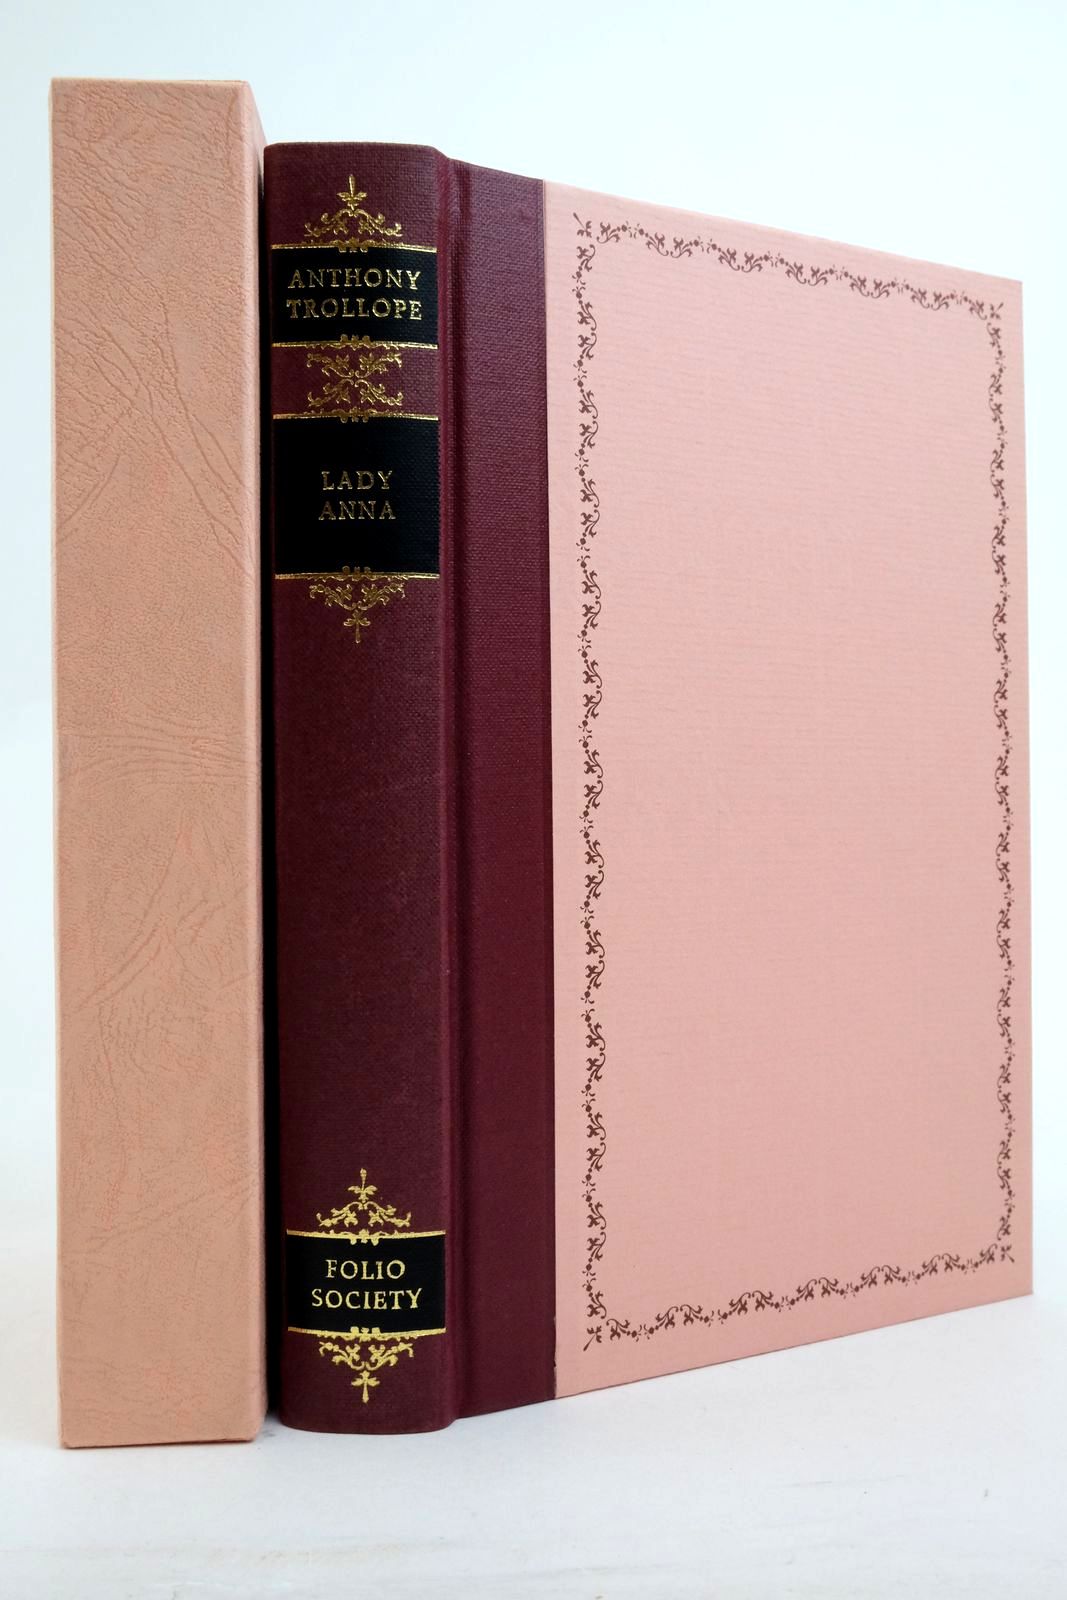 Photo of LADY ANNA written by Trollope, Anthony illustrated by Wilkinson, Barry published by Folio Society (STOCK CODE: 2138187)  for sale by Stella & Rose's Books